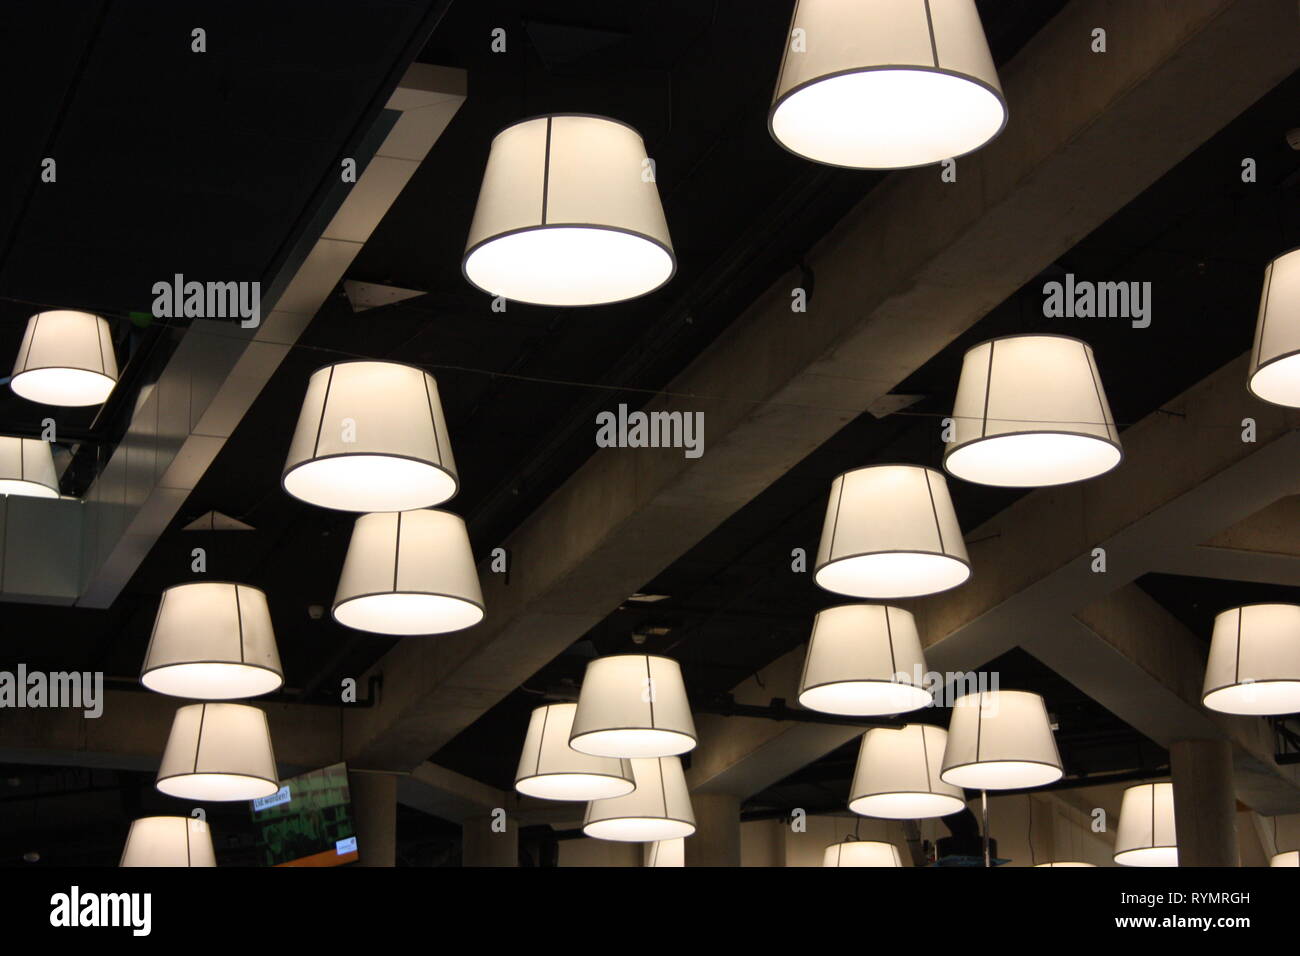 Modern Lamps And Bulbs Hanging From The Ceiling Radiate Light In